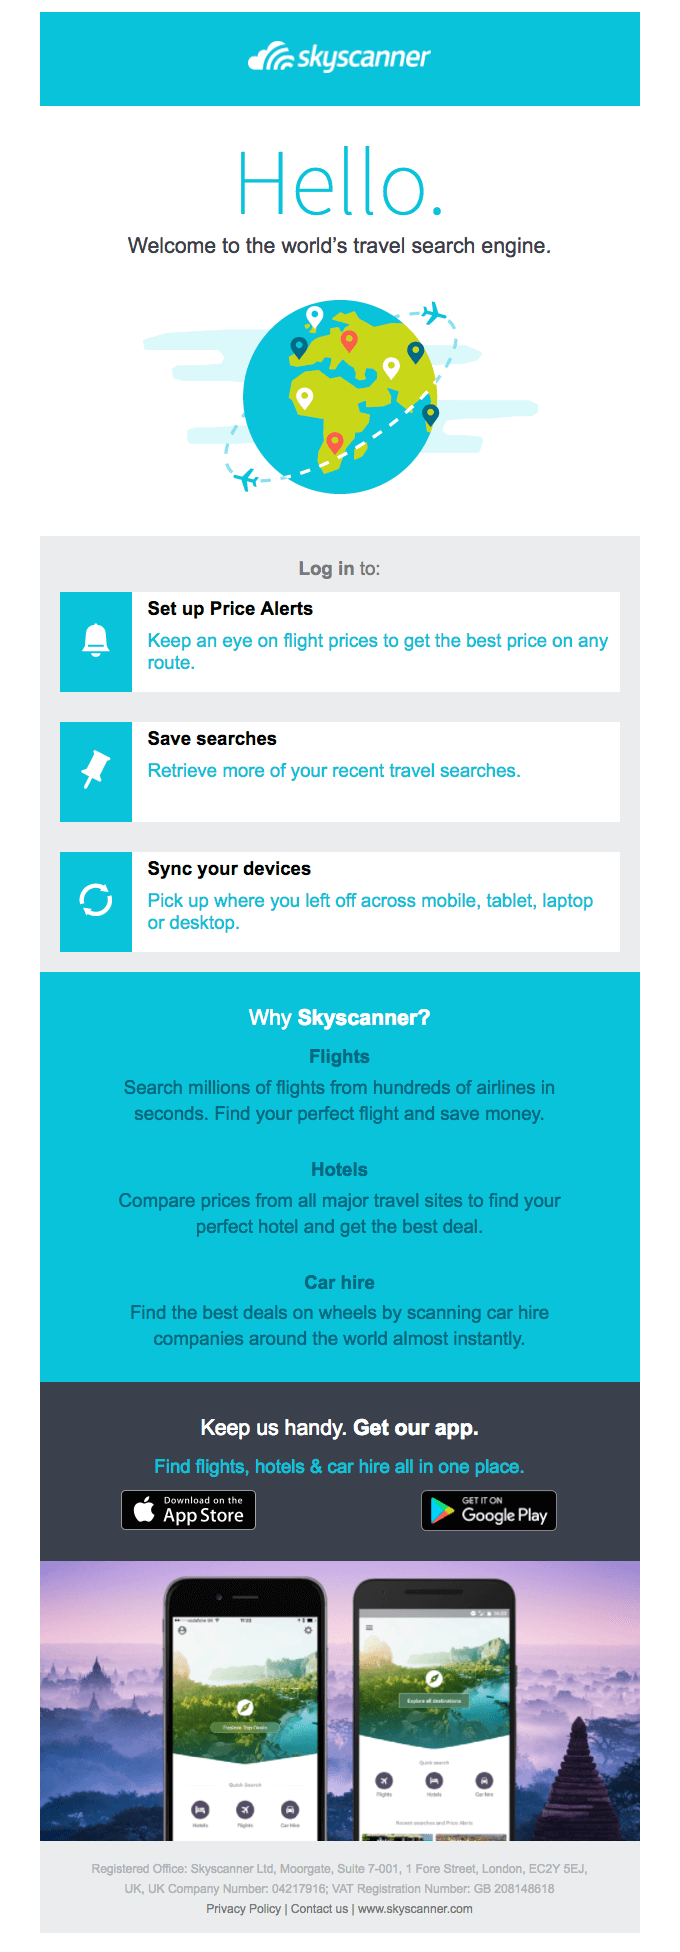 Welcome to Skyscanner - Really Good Emails